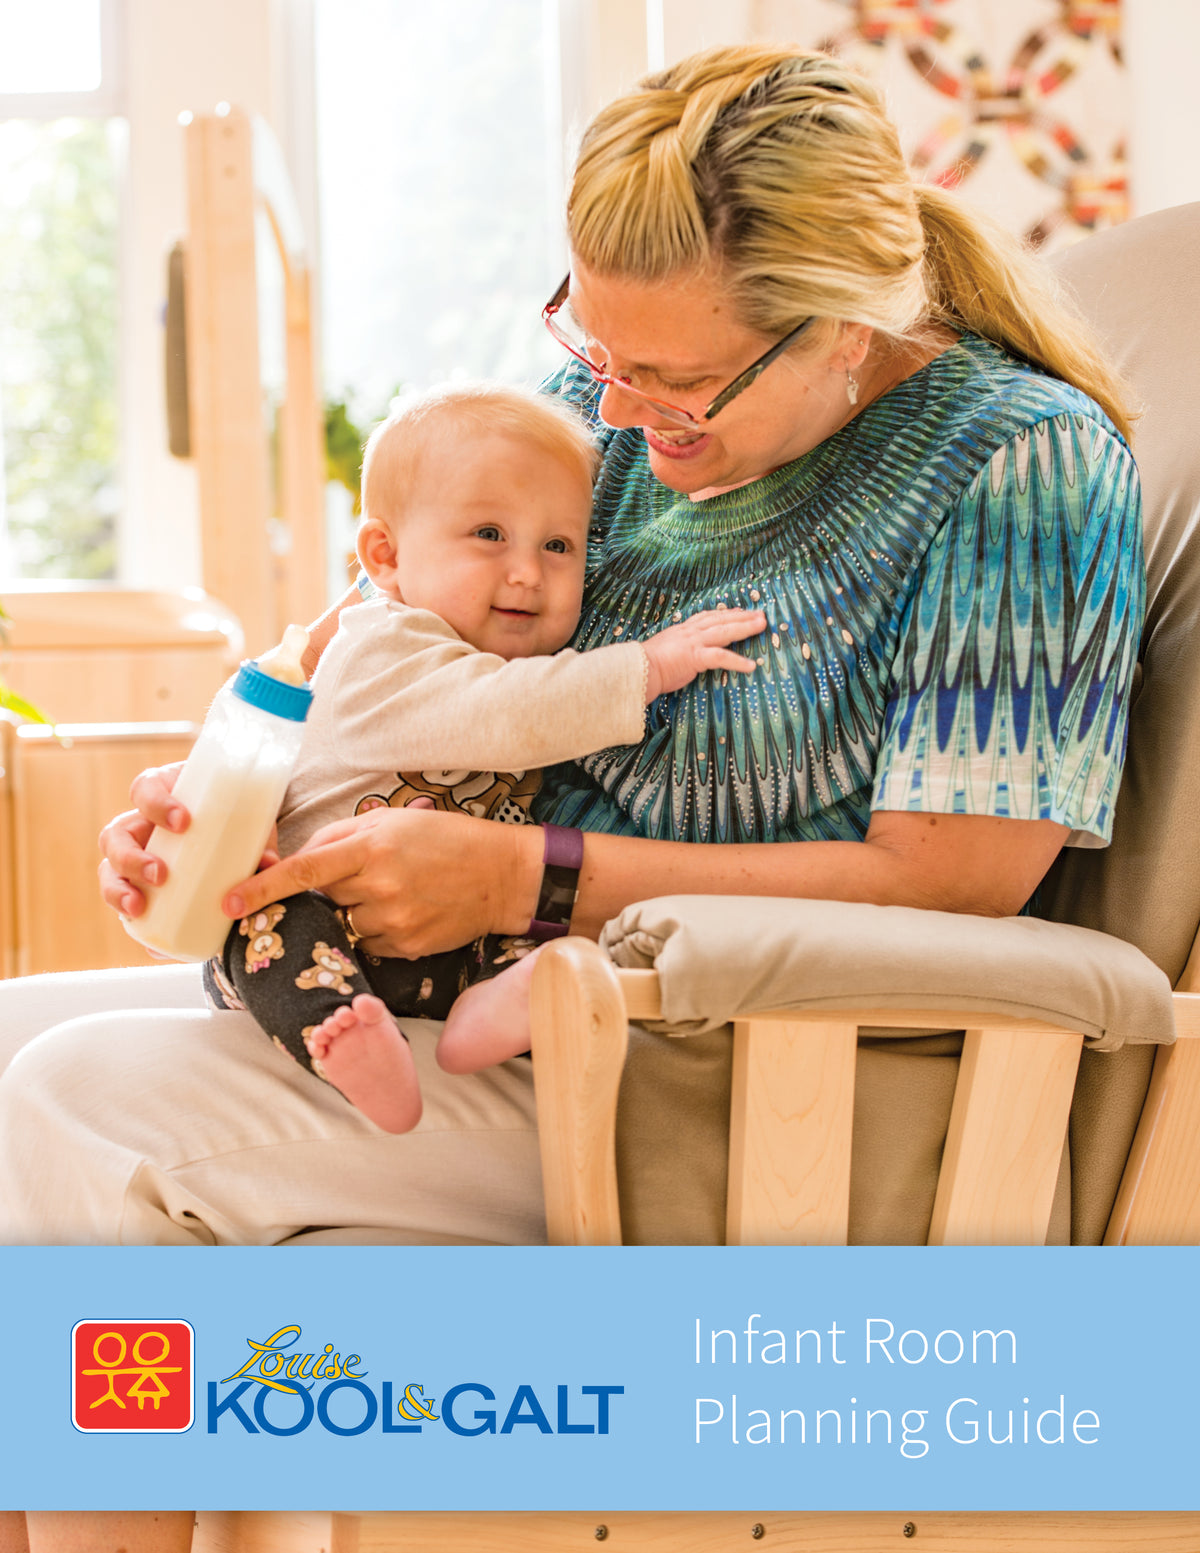 New 2021 Infant Room Planning Guide is here!